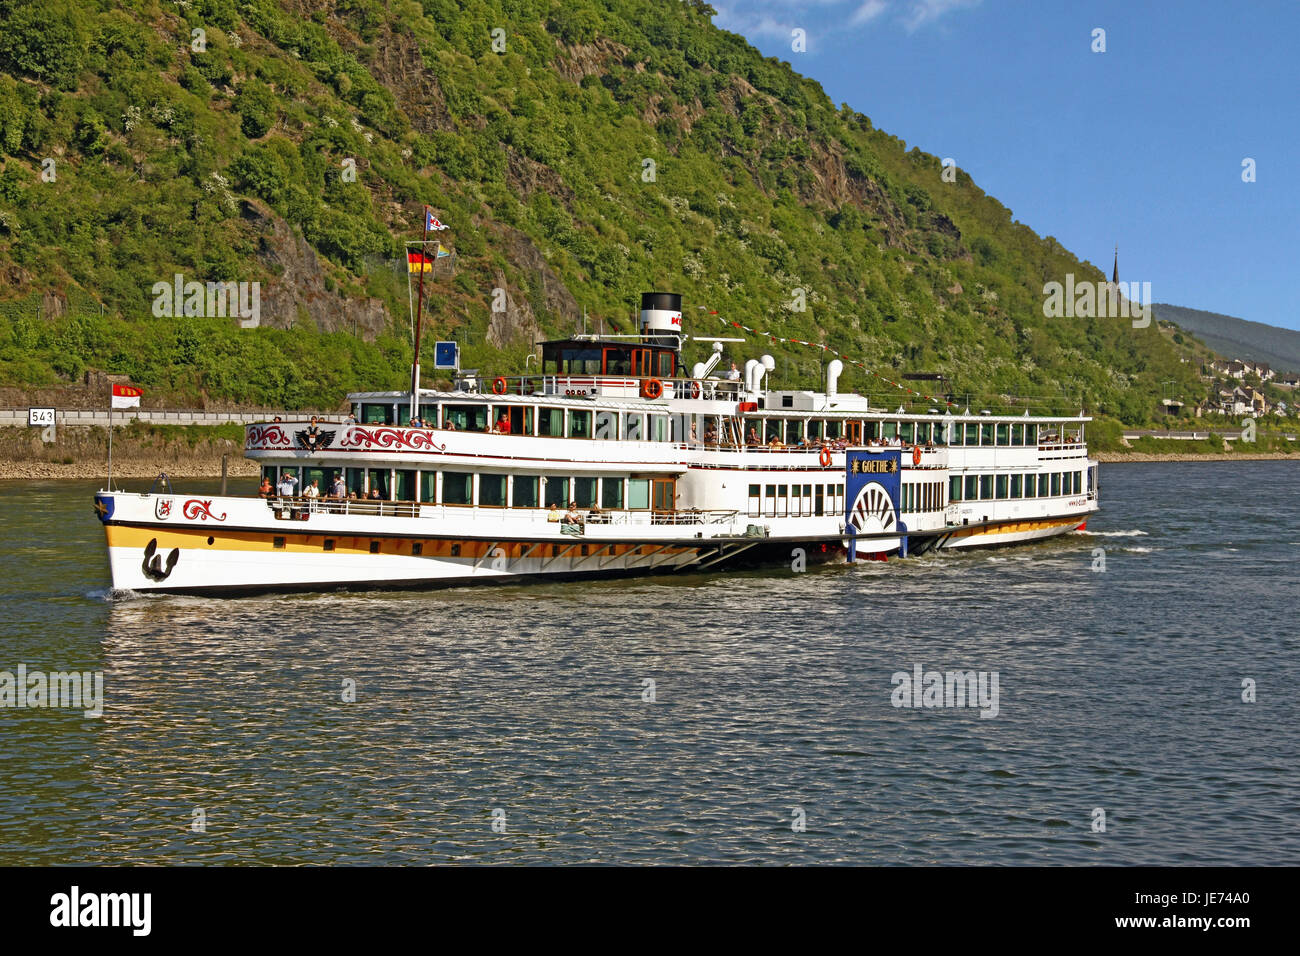 Steamboat Journey High Resolution Stock Photography and Images - Alamy